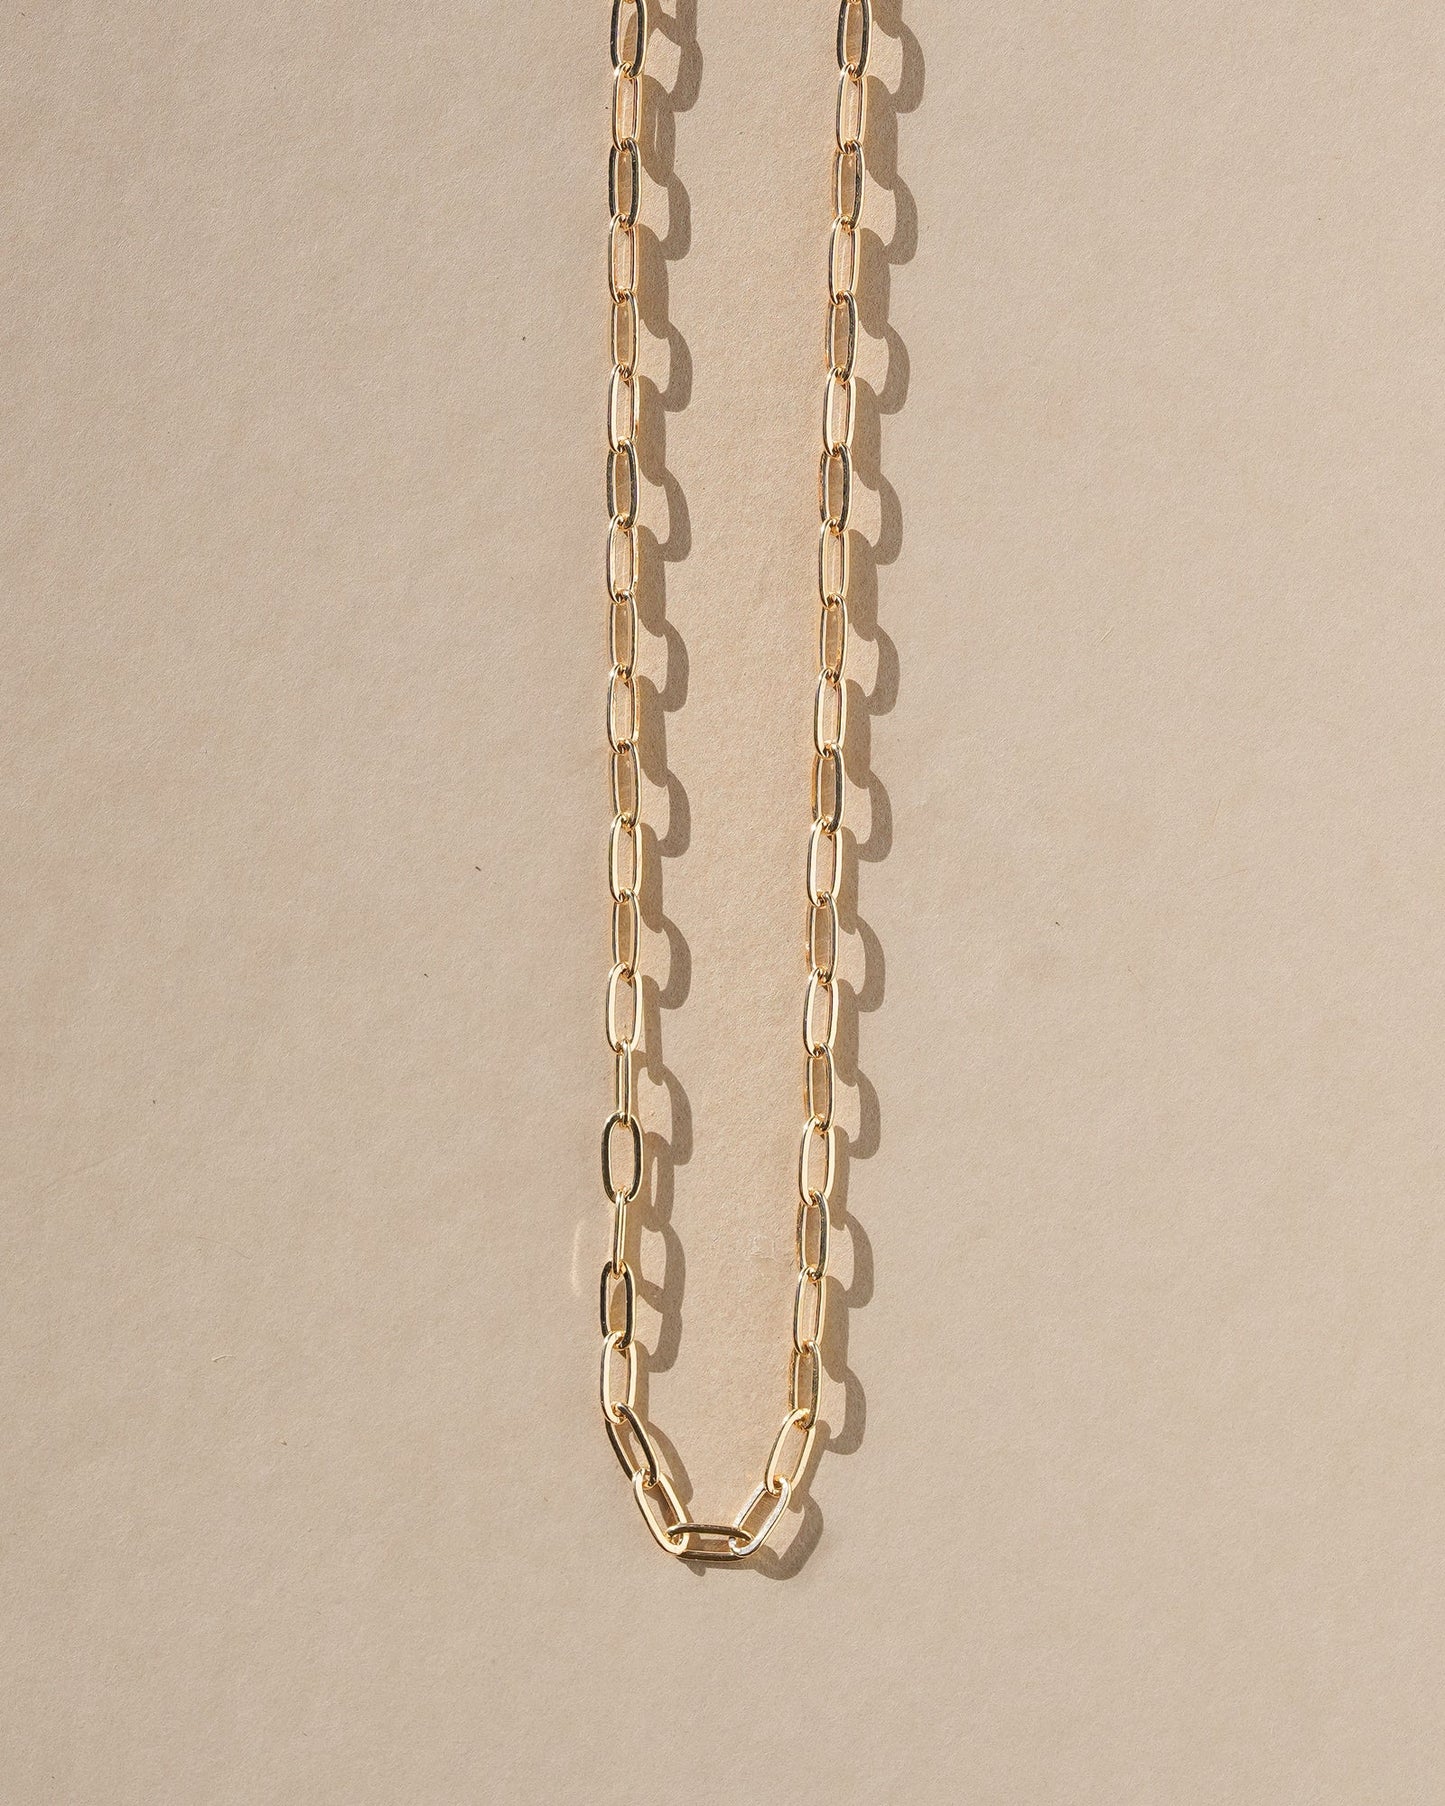 The Allora necklace - with interlocking soft oval links that sit elegantly along the neckline. As an ode to love that never parts, the links are designed to resemble the infinity symbol. Wear it solo or layered with other necklaces in this collection. Handmade in the Santa Cruz Mountains.